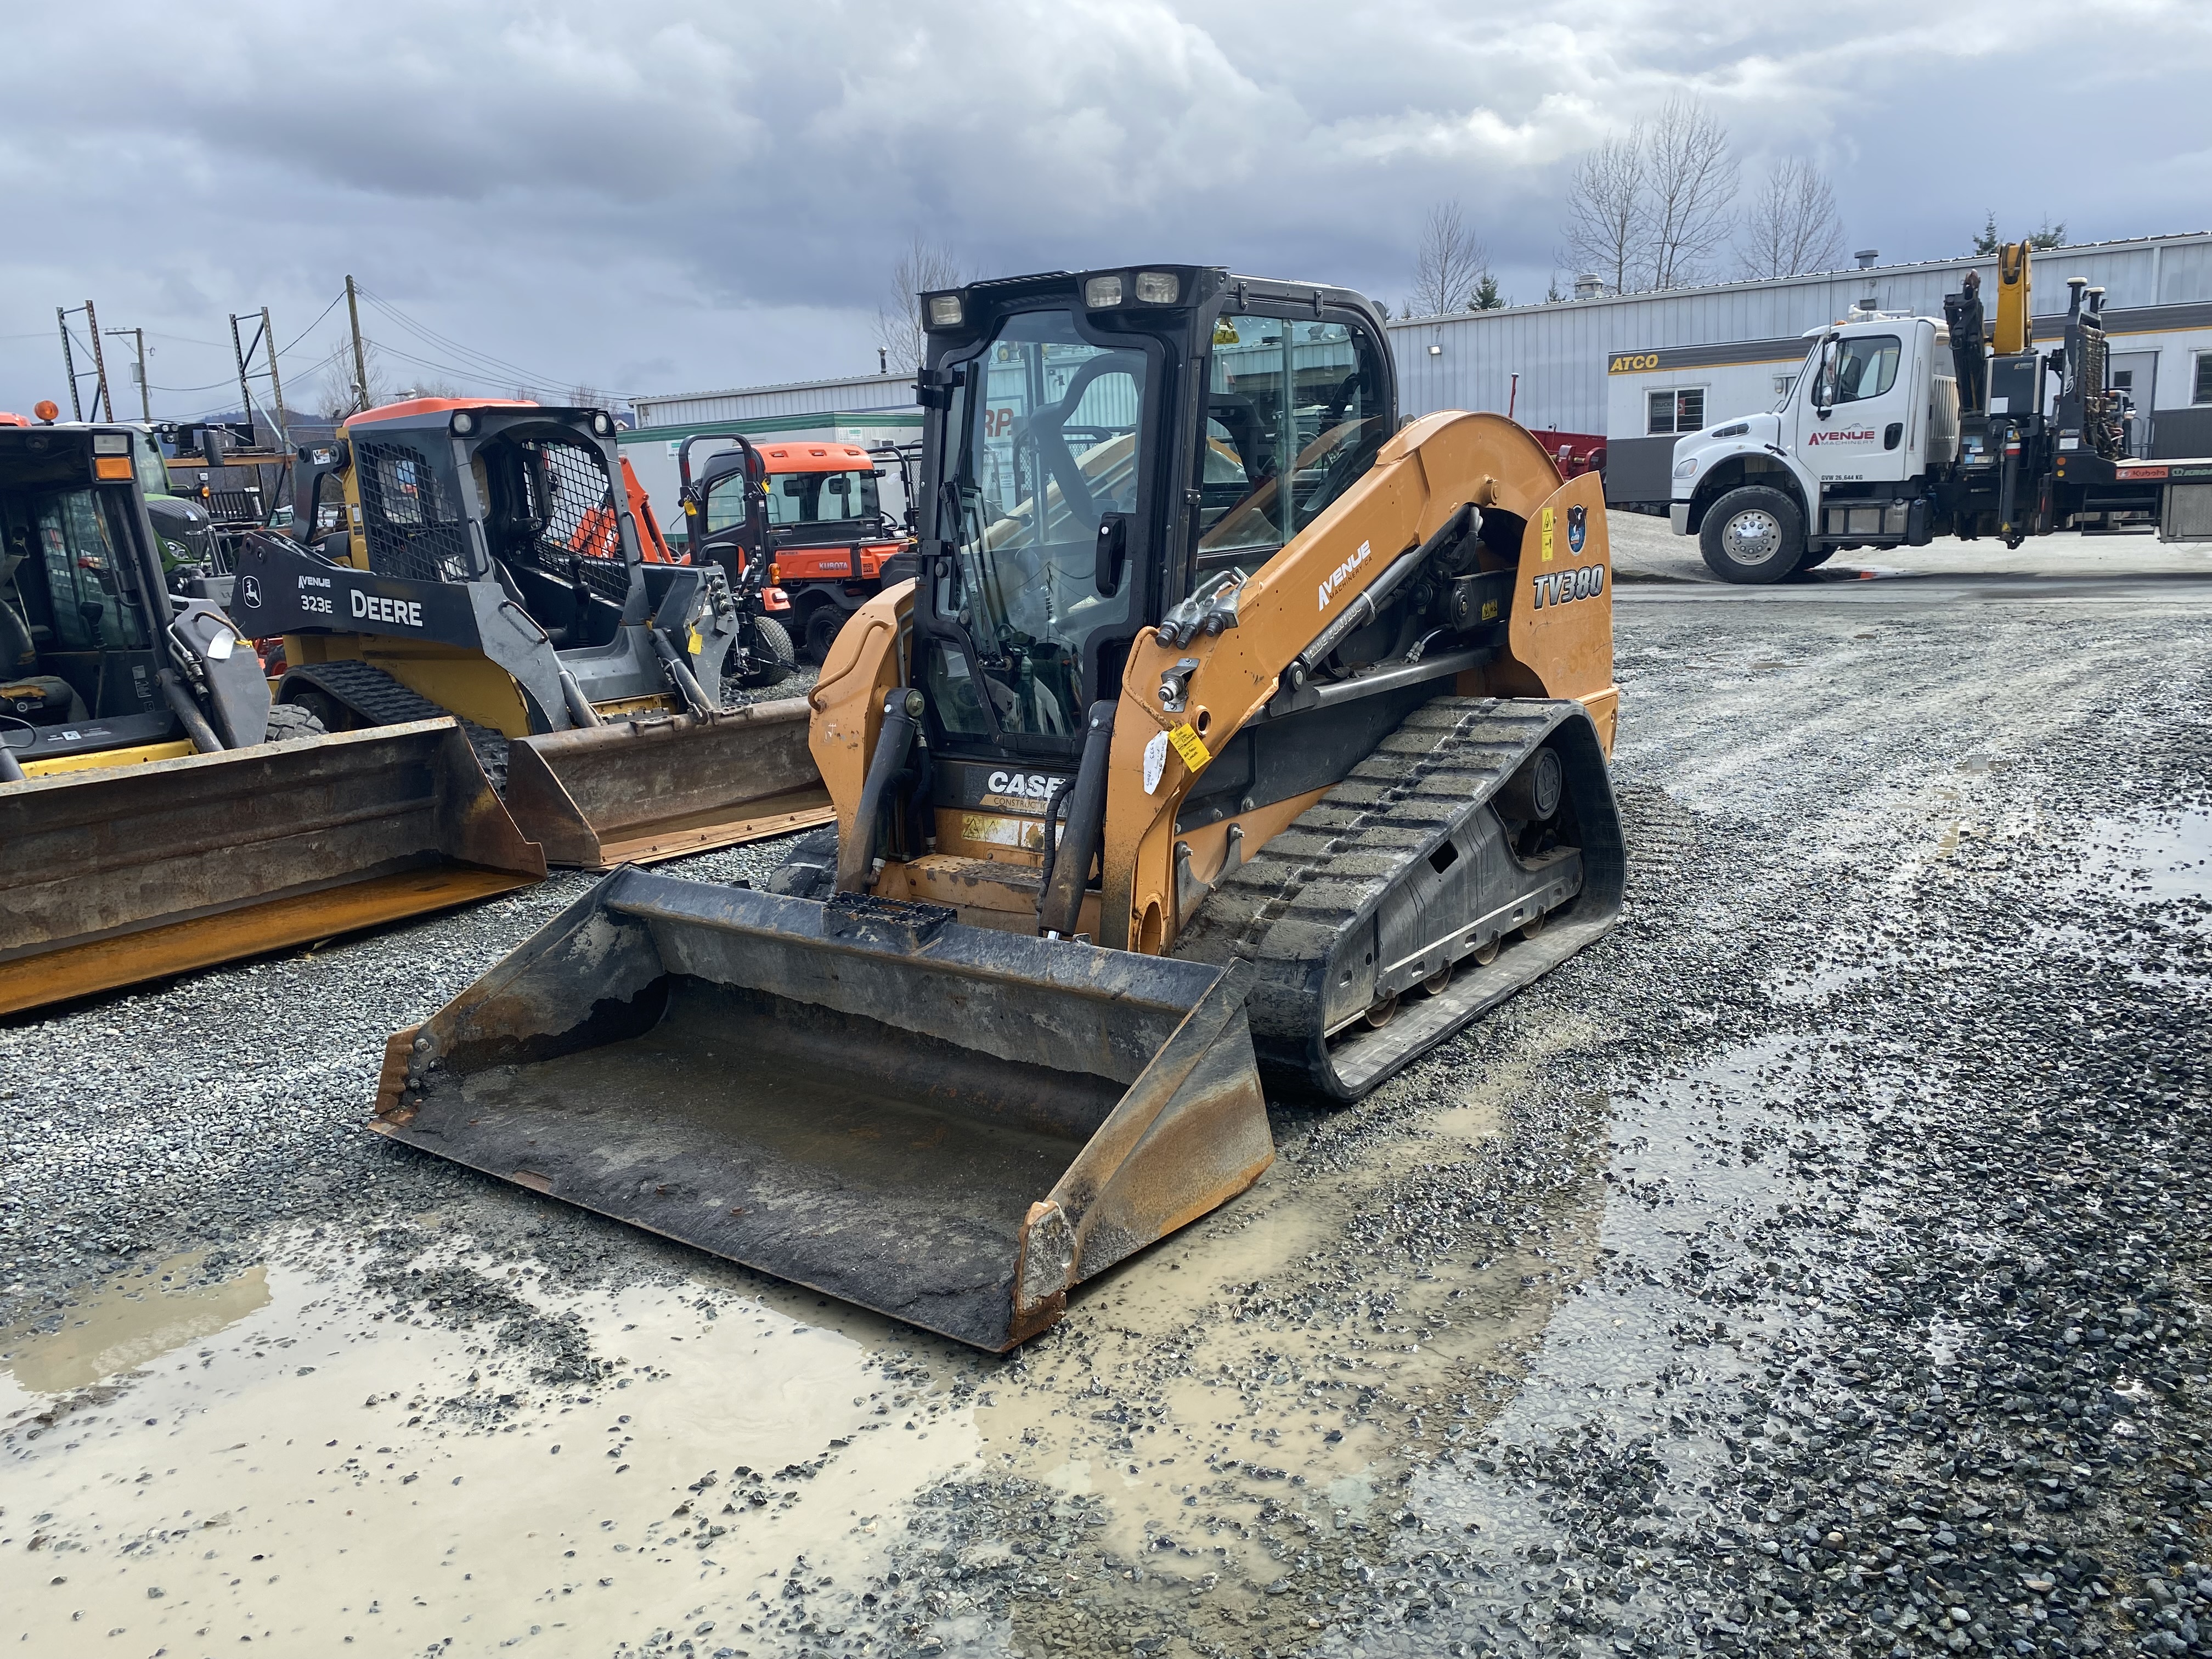 Case TV380 Compact Tracked Loader